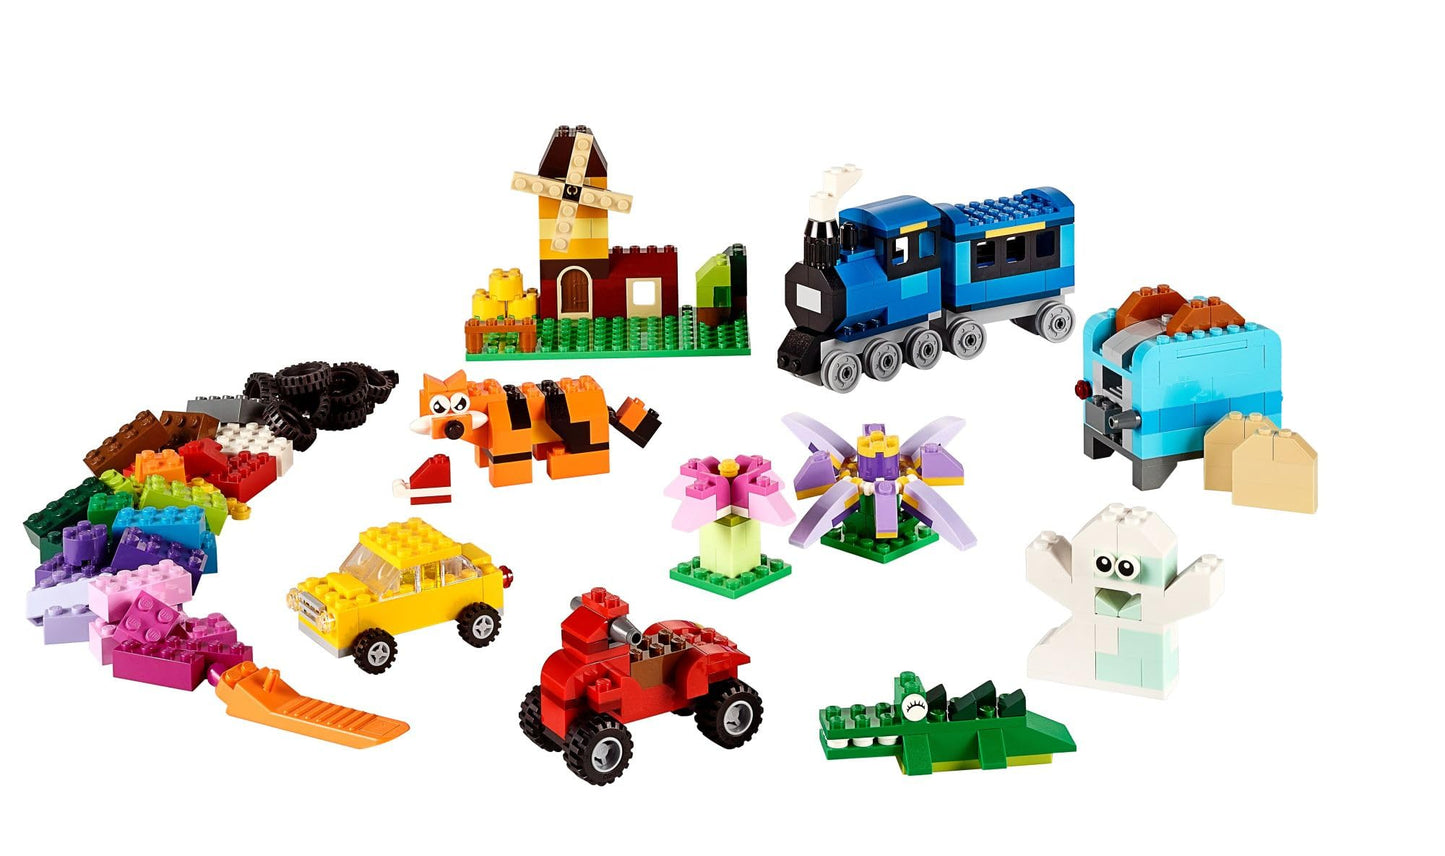 LEGO Classic Medium Creative Brick Box 10696 Building Toy Set - Featuring Storage, Includes Train, Car, and a Tiger Figure, and Playset for Kids, Boys, and Girls Ages 4-99